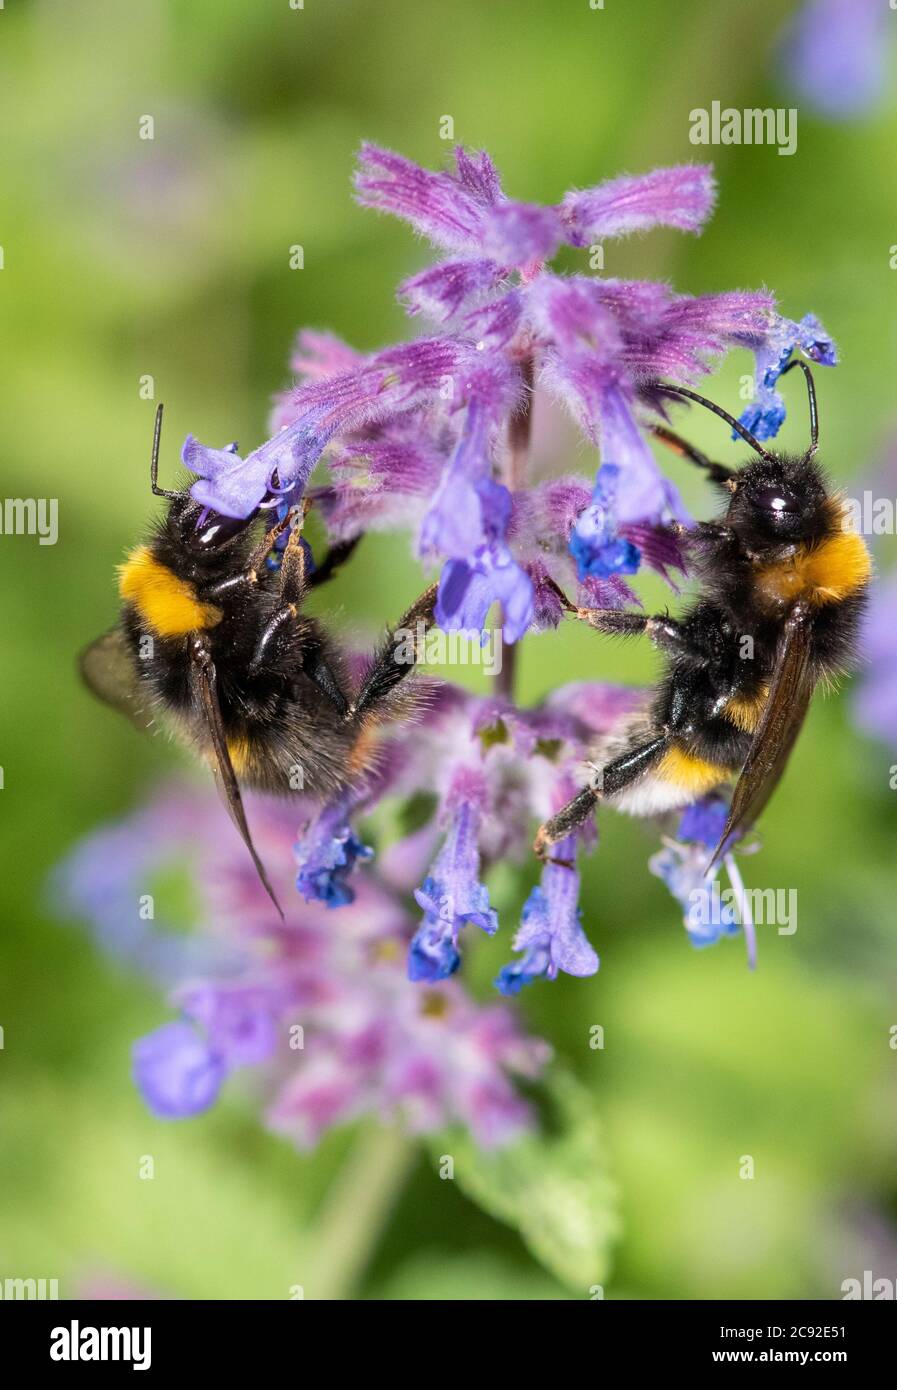 Bumble bees collecting pollen from Catmint flowers, Chipping, Preston, Lancashire. Stock Photo